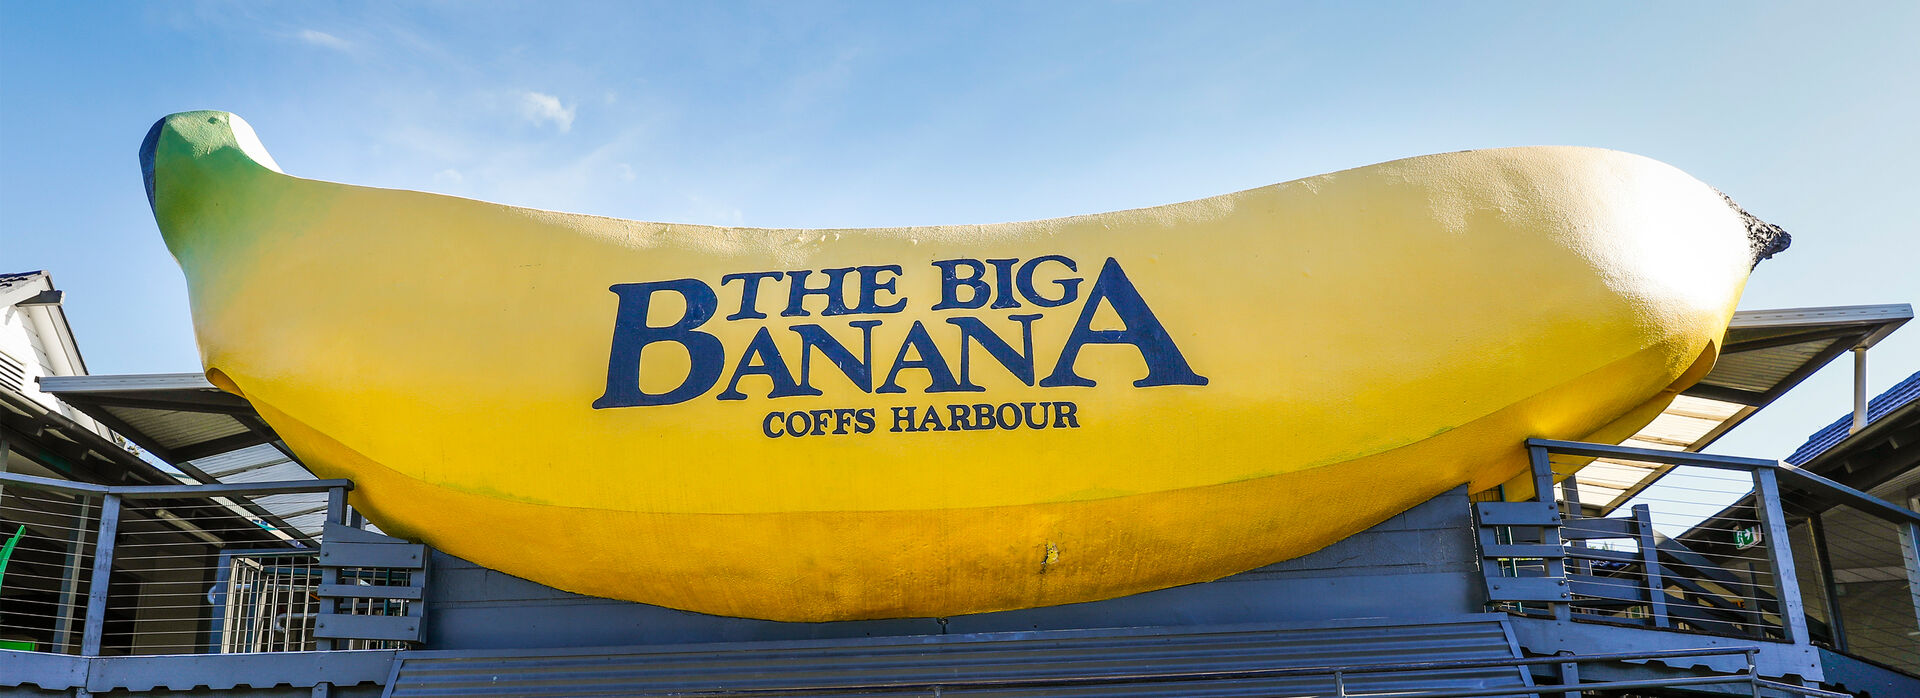 Big Banana in Coffs Harbour New South Wales